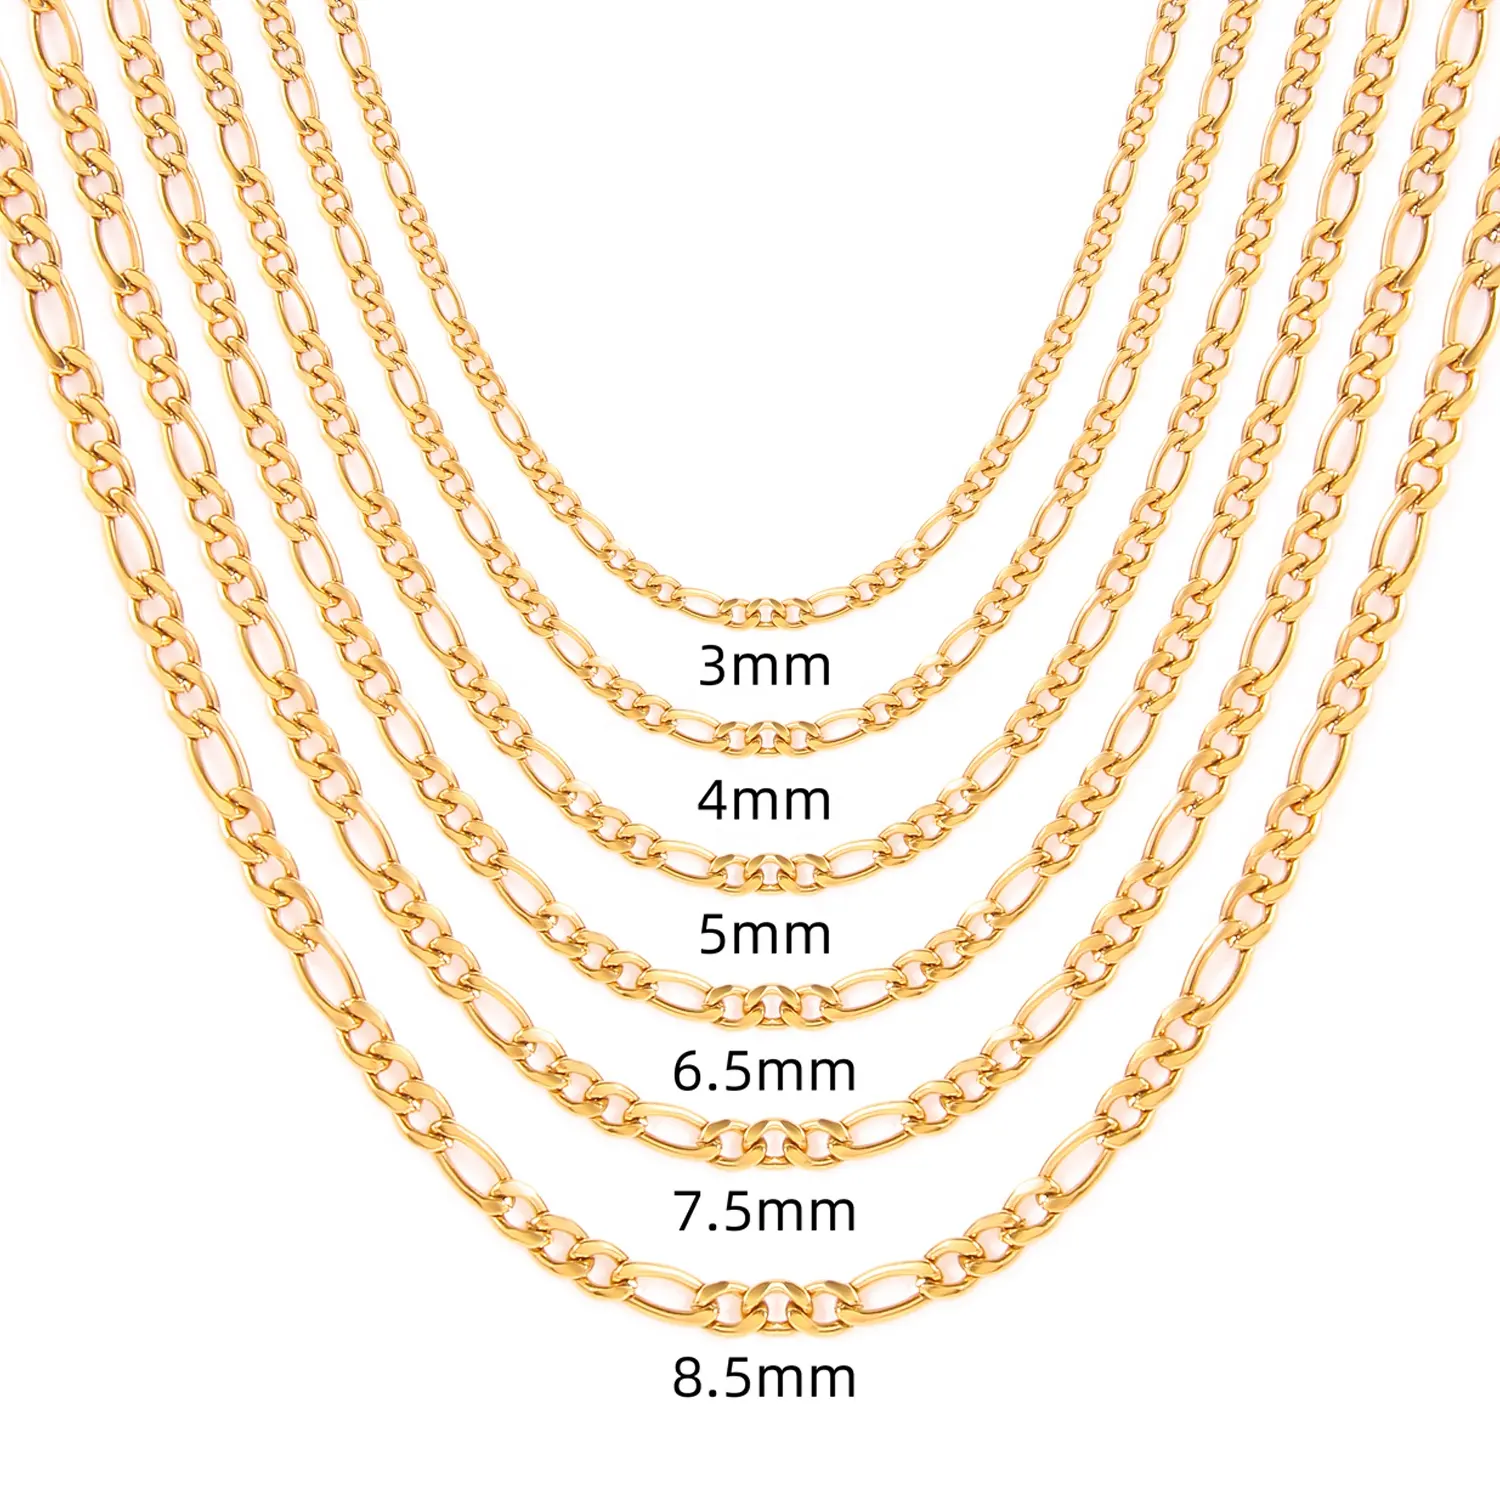 Stainless Steel 18k Real Gold Plated Figaro Link Chain Necklace For Men Women